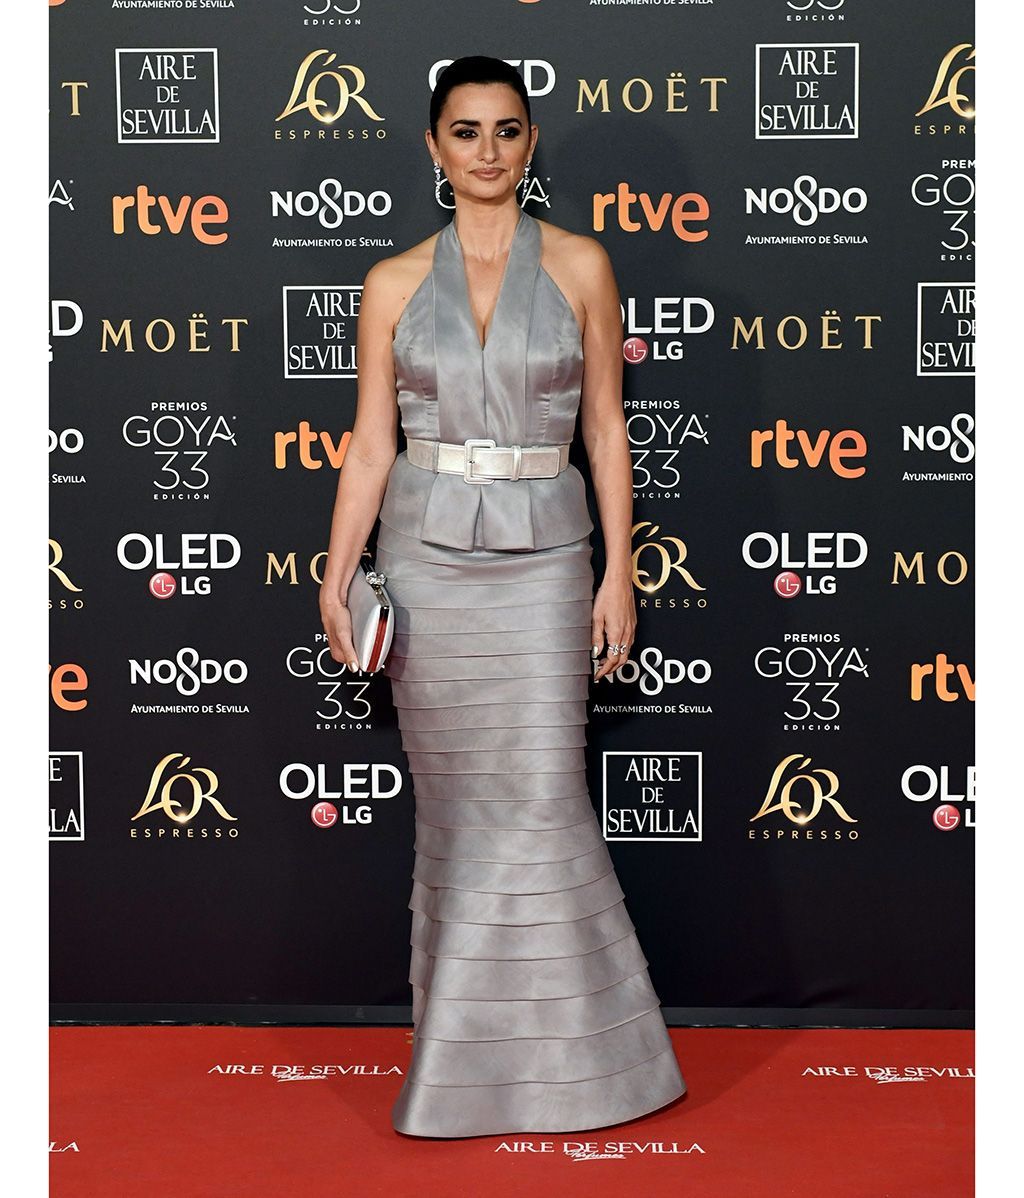 Actress Penelope Cruz at photocall during the 33th annual Goya Film Awards in Sevilla, on Saturday 2nd February, 2019.